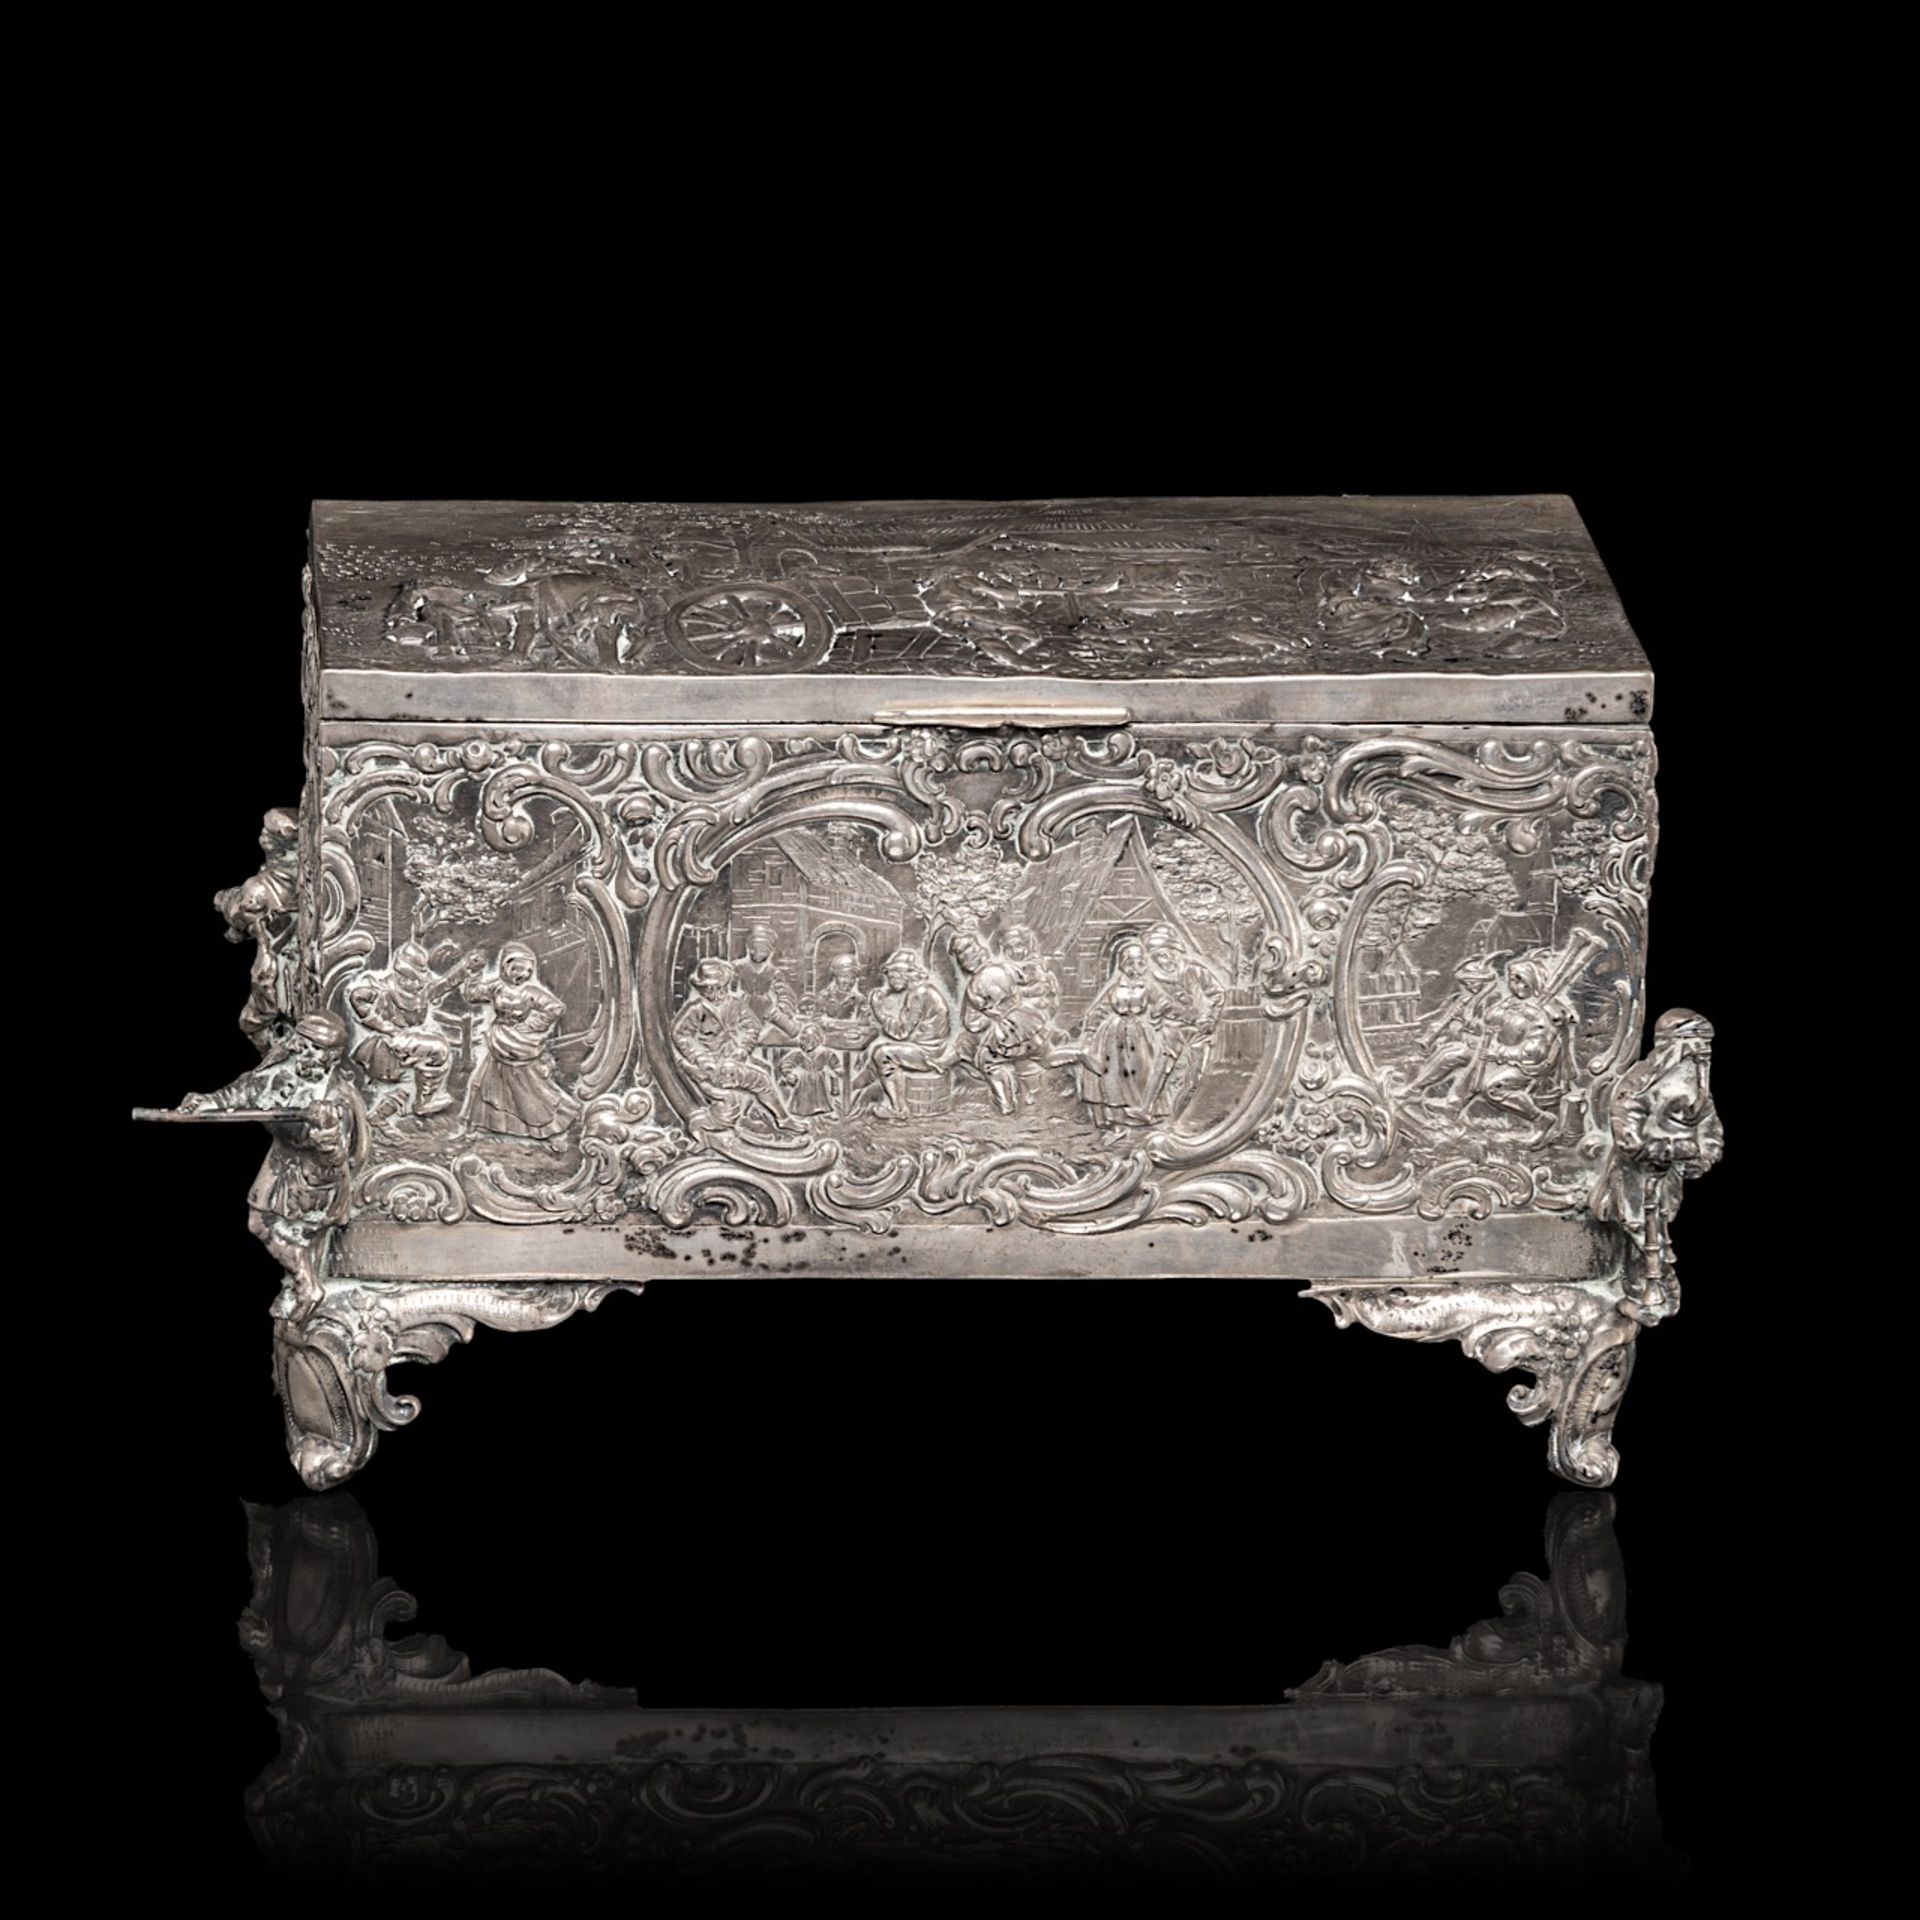 A Baroque Revival German silver jewellery casket, (1888-present), 800/000, weight ca: 1312 g 14.5 x - Image 2 of 9